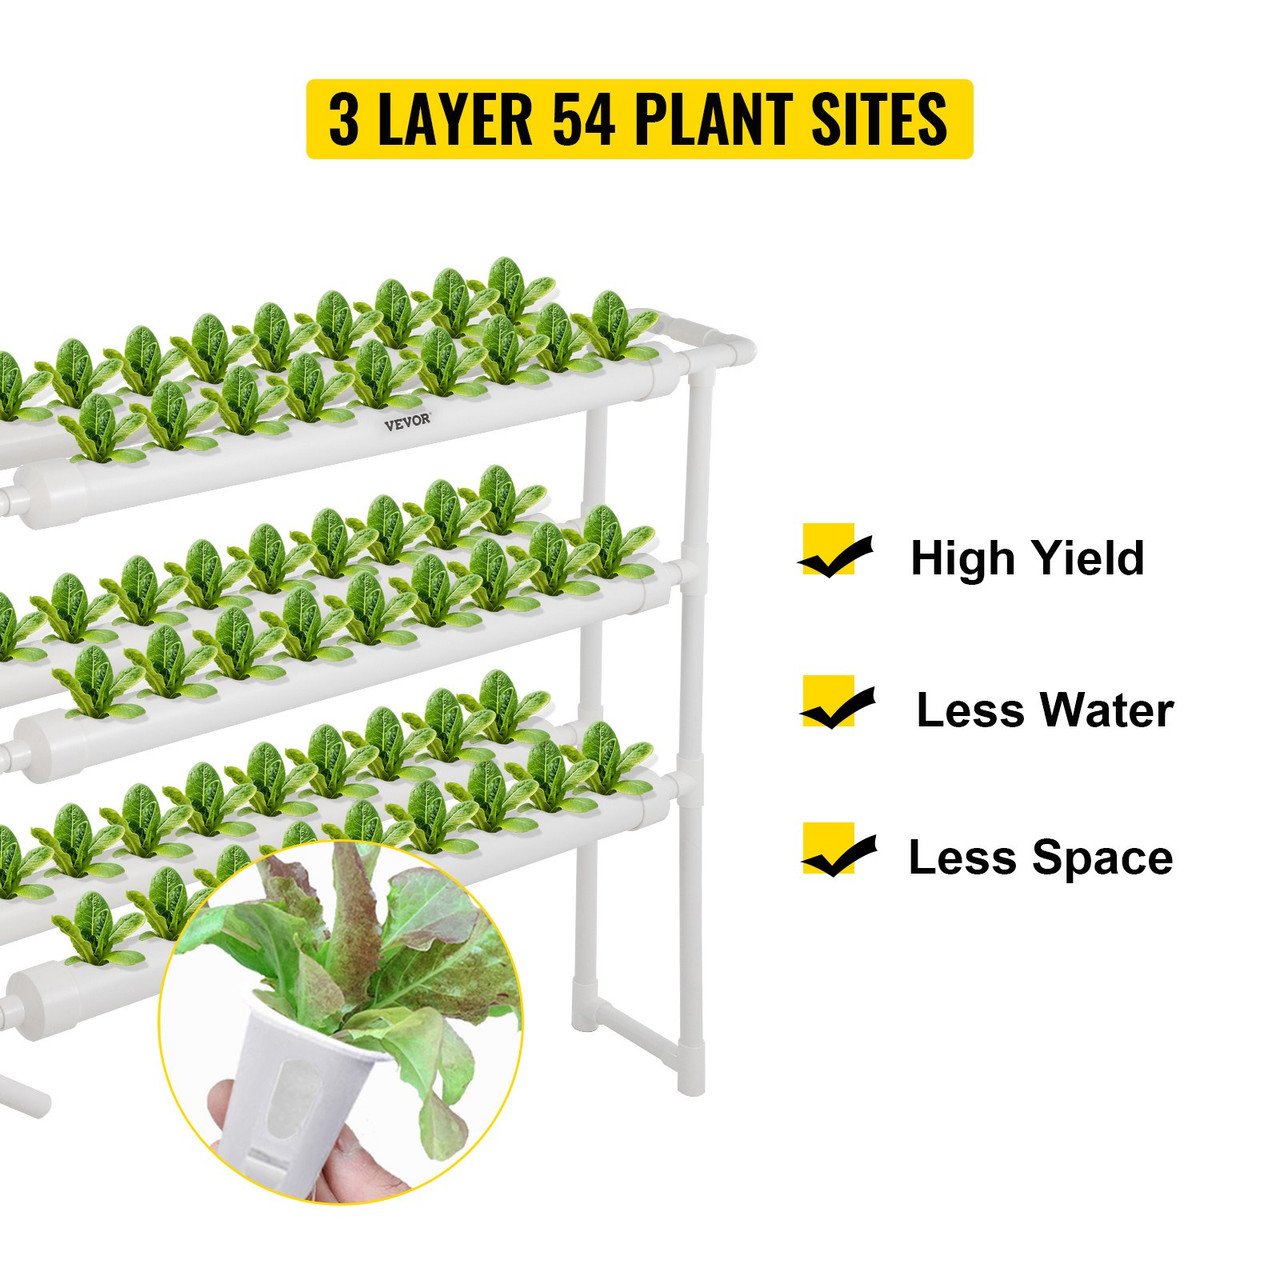 VEVOR Hydroponic Grow Kit 6 Pipes 3 Layers 54 Plant Sites Drain-lever Culture Lettuce